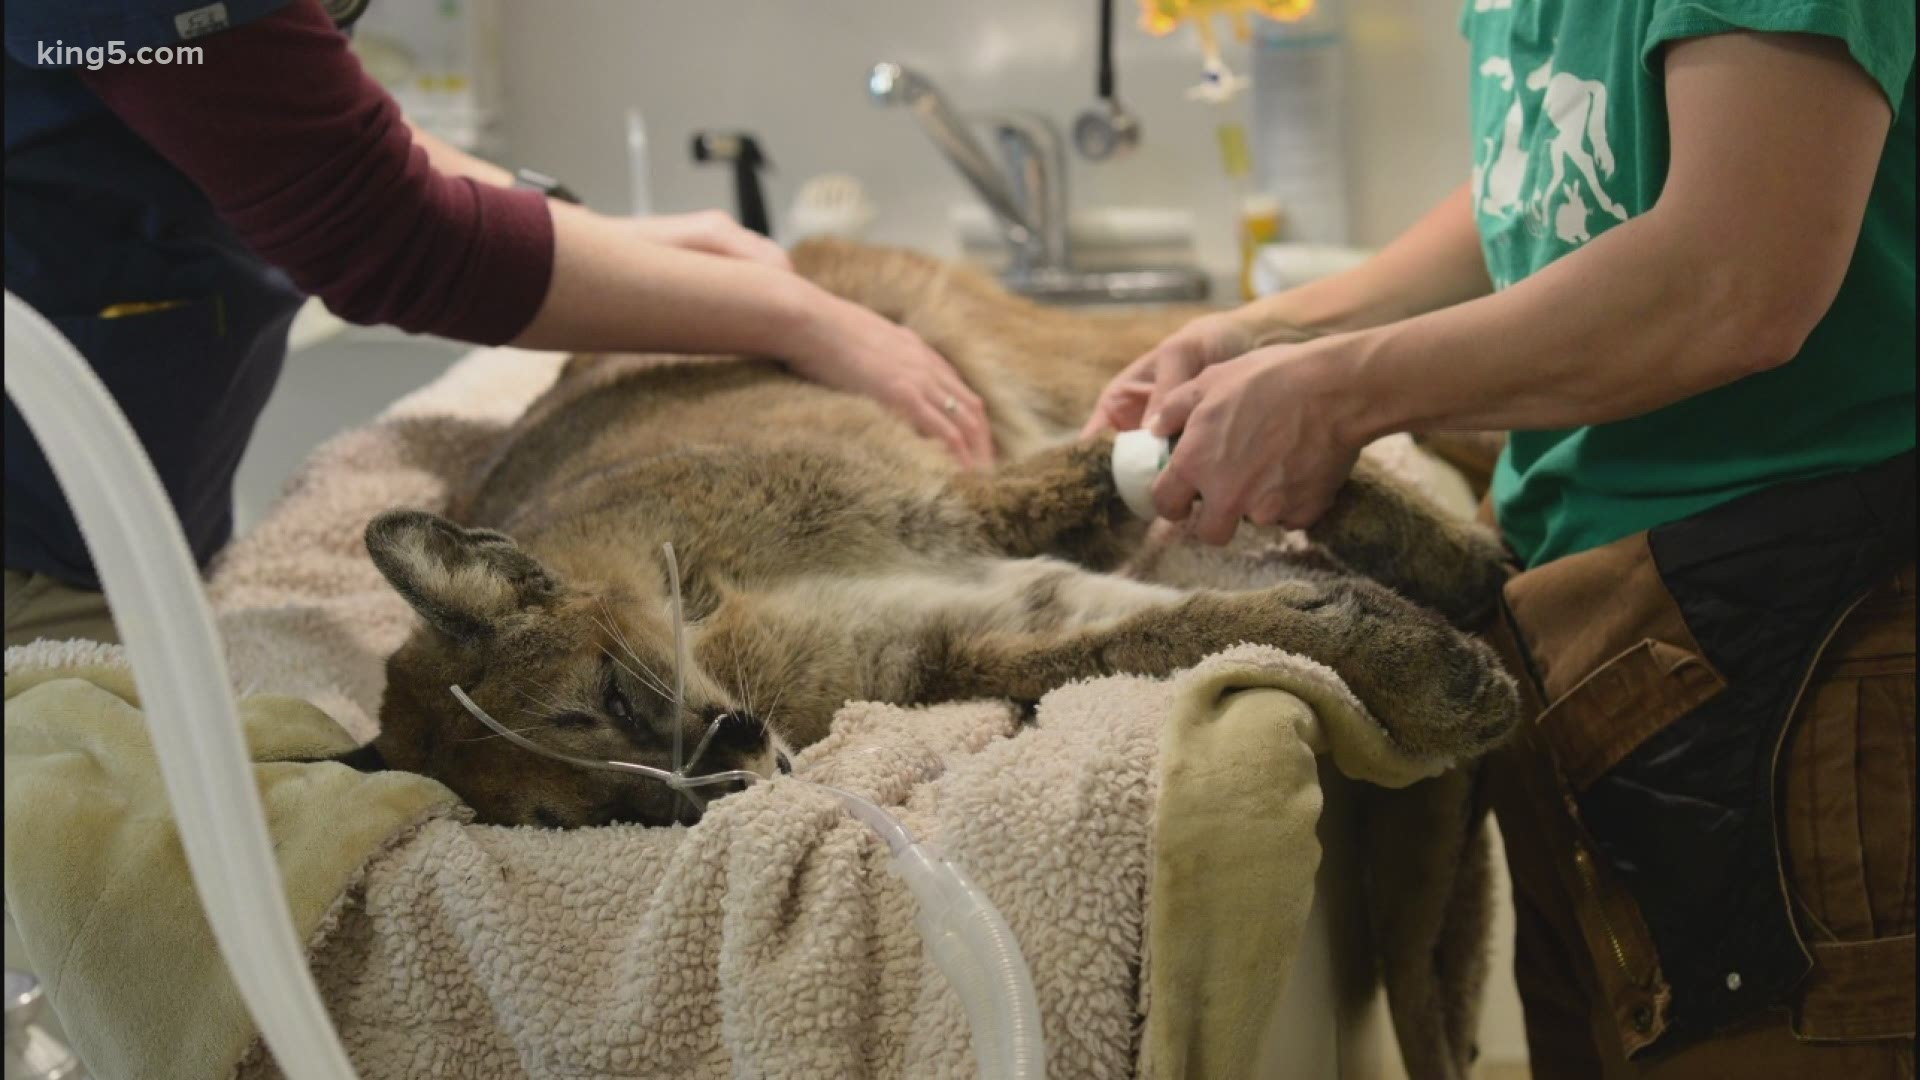 An orphaned cougar suffering from starvation found its way to the Central Valley Animal Rescue in Washington and was later transported to Waco.